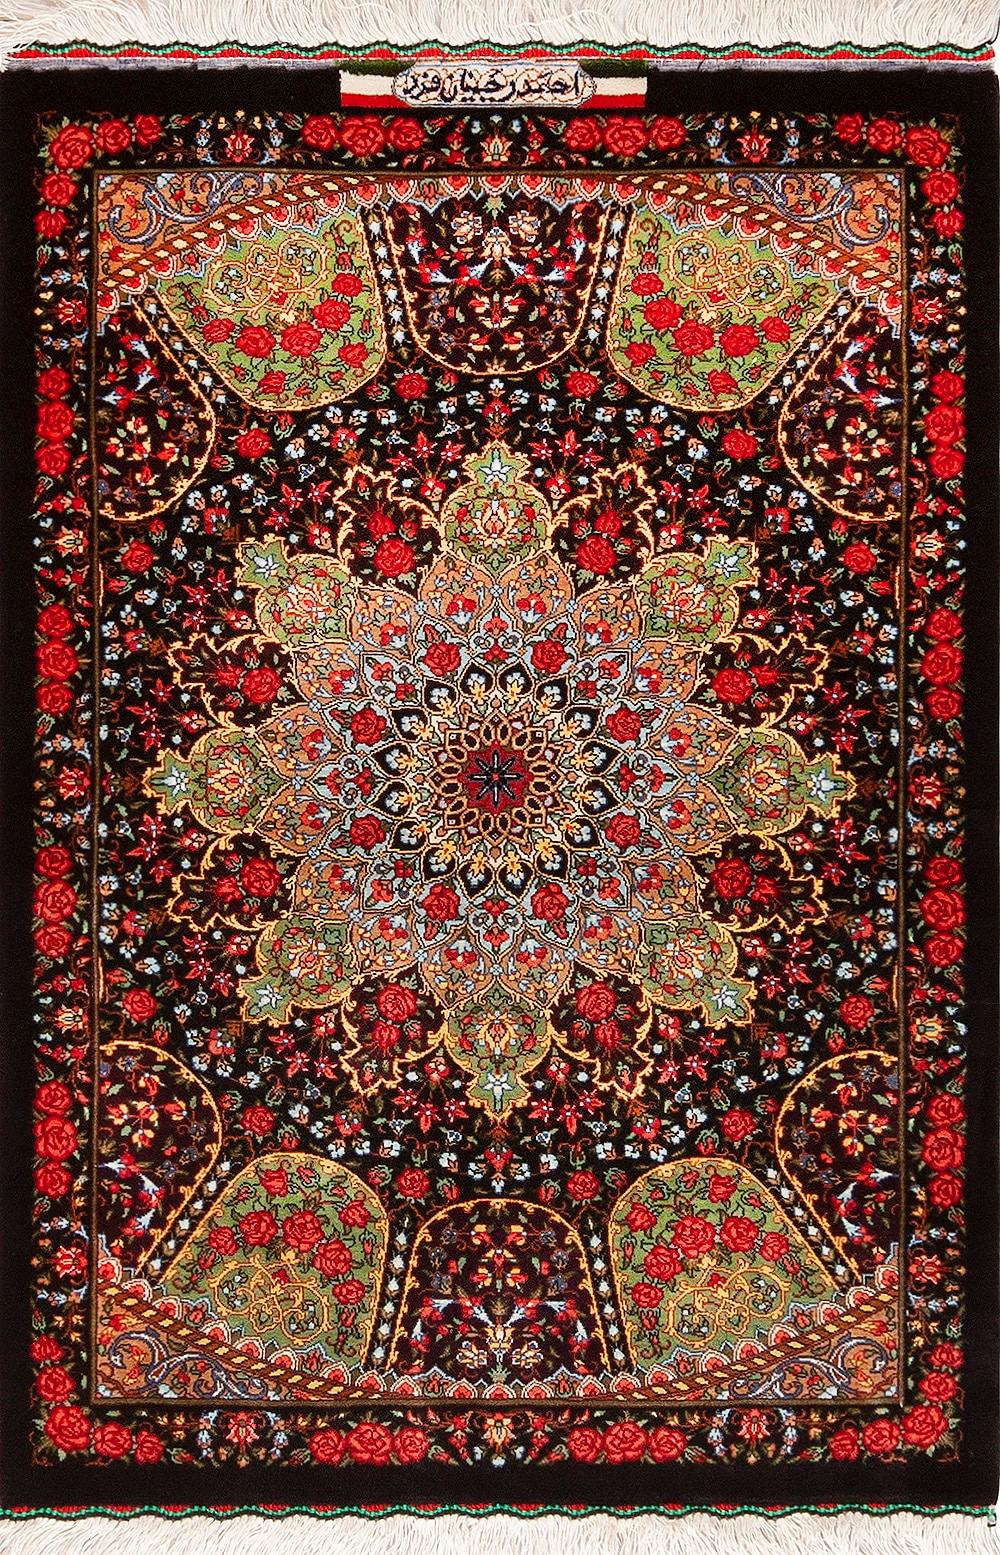 Magnificent Fine Small Size Luxurious Vintage Persian Qum Silk Rug 2' x 3' In Good Condition For Sale In New York, NY